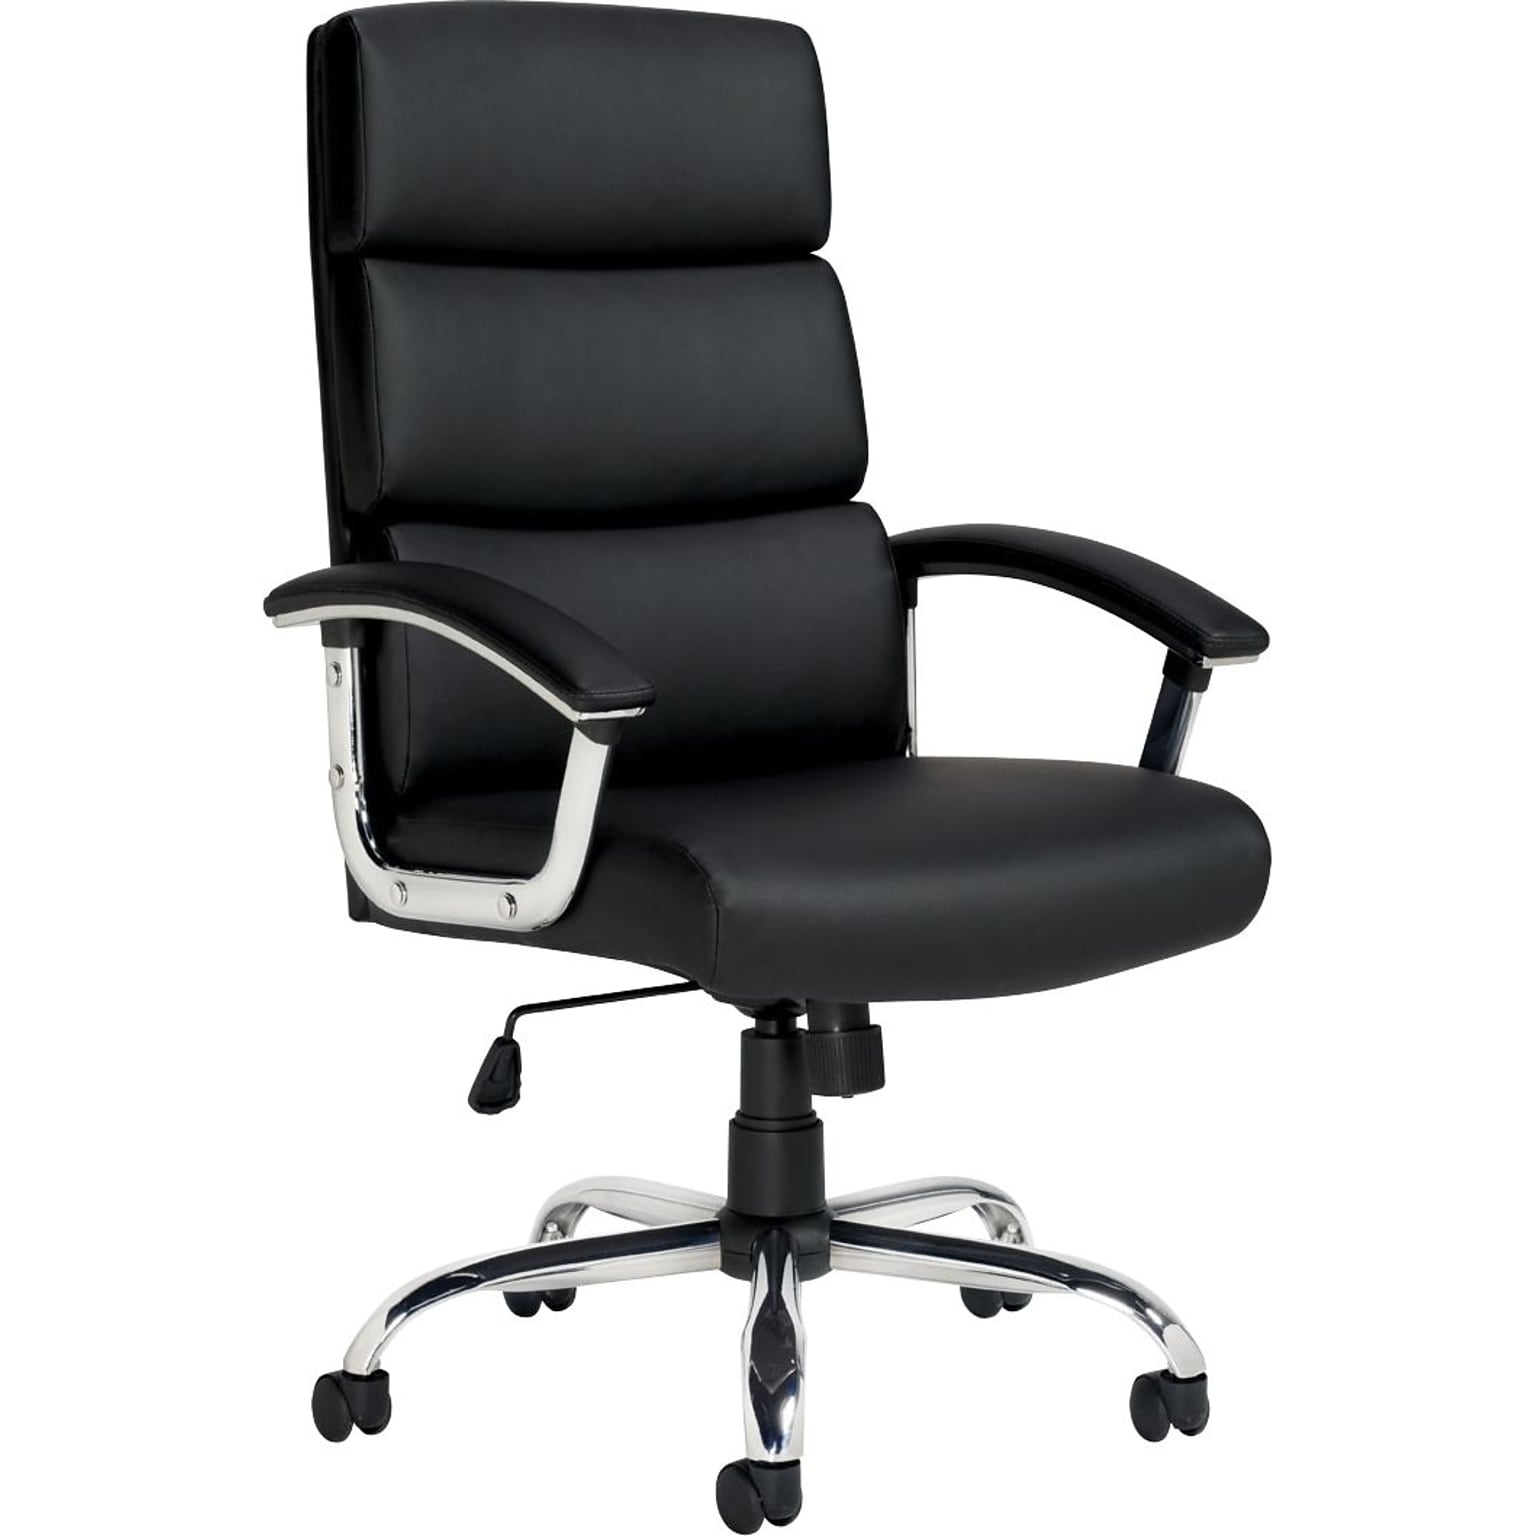 Offices To Go® Executive Chair, Luxhide Upholstery, Black, Seat: 21W x 18D, Back: 24H x 19 1/2W